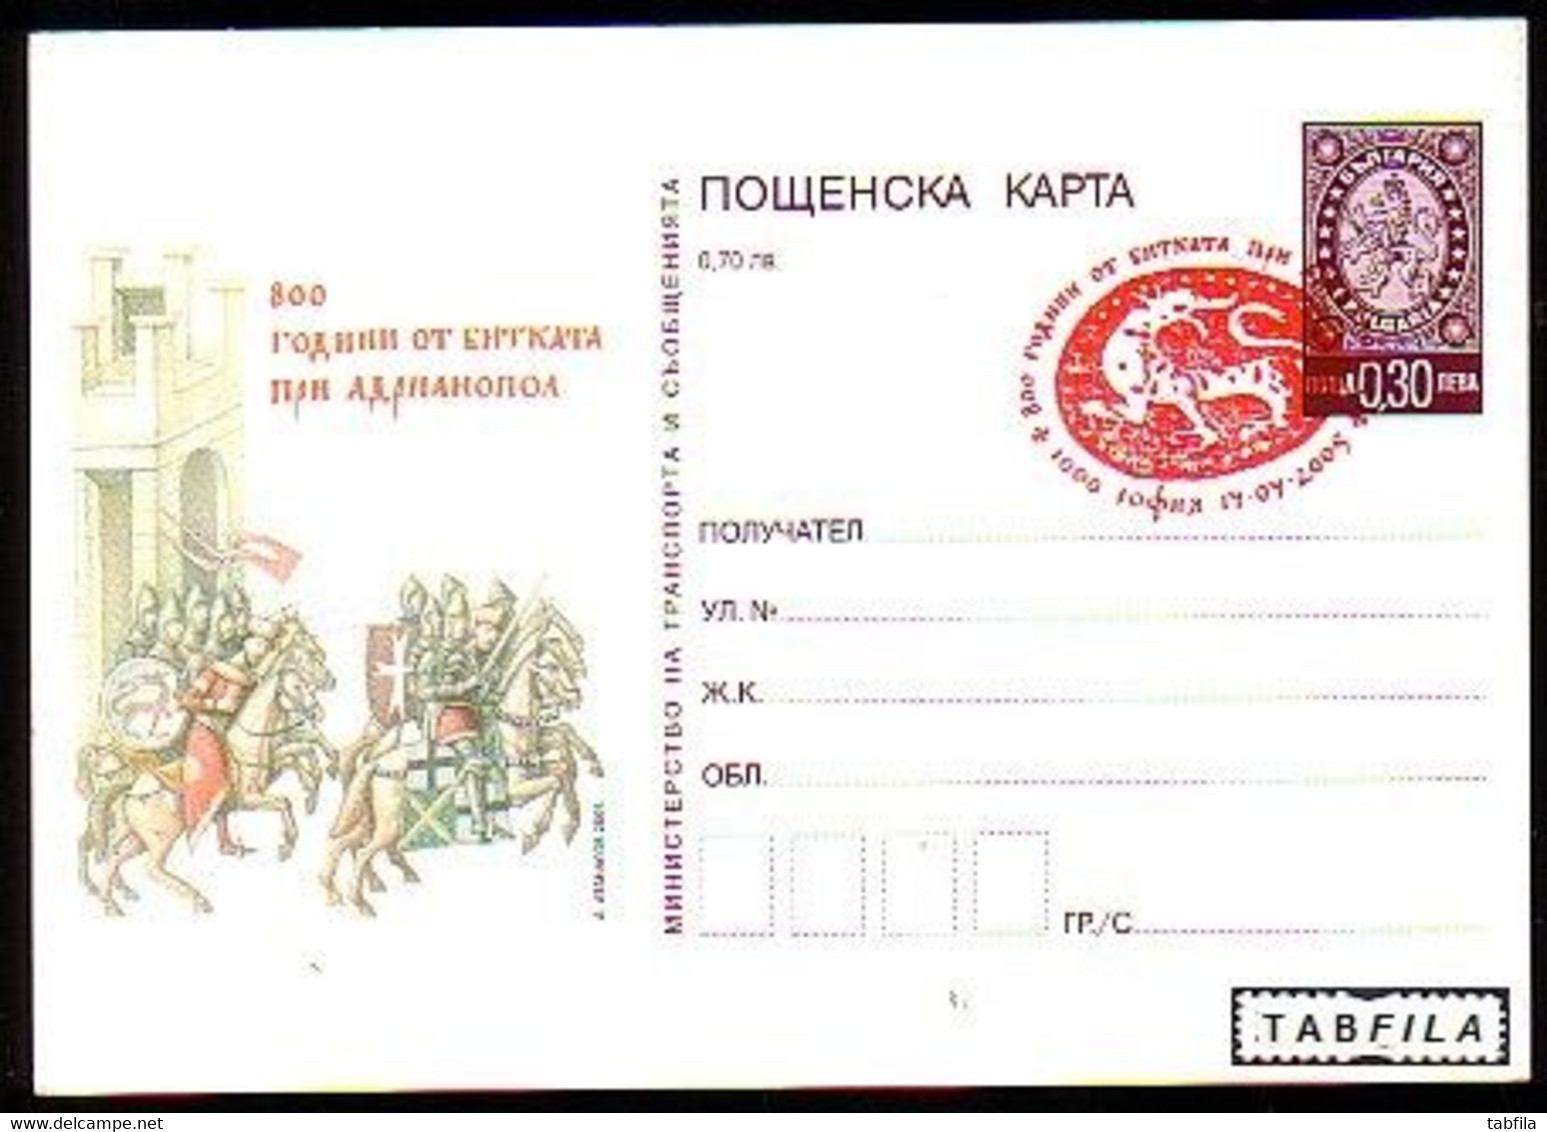 BULGARIA - 2005 - 800 Years Since The Battle Of Adrianople - P.cart Spec Cache - Rare - Postales